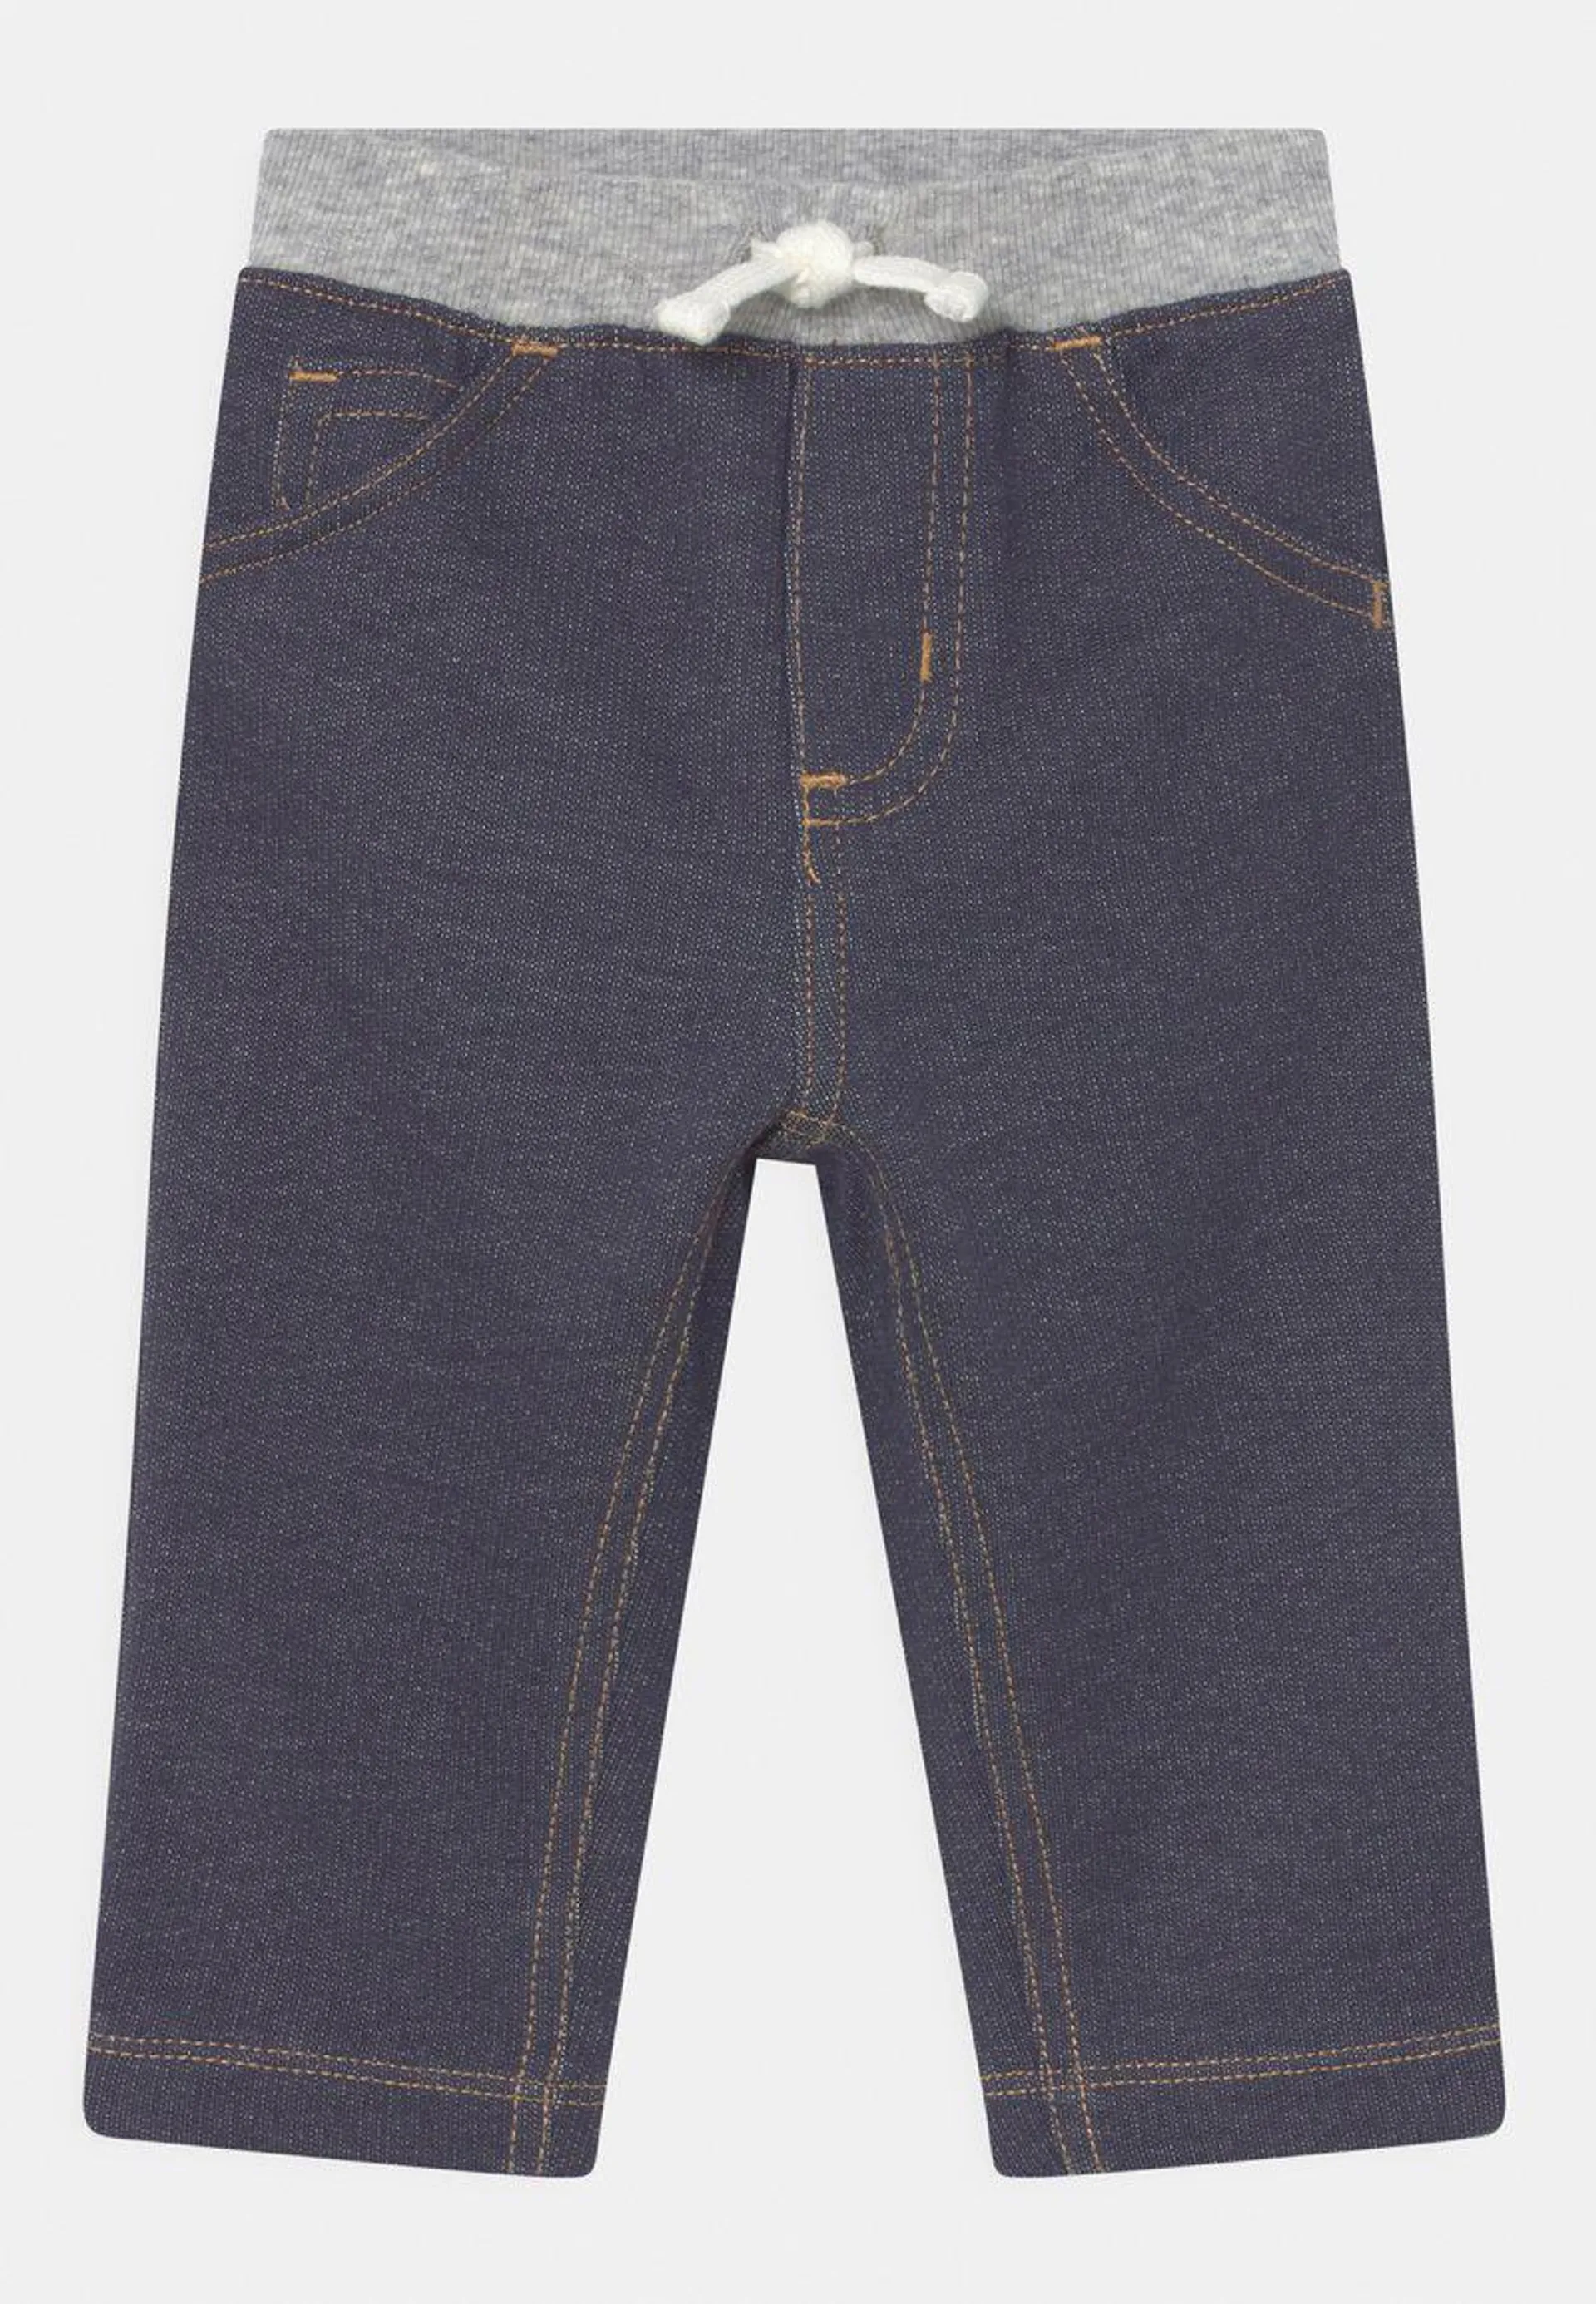 PANTS - Relaxed fit jeans